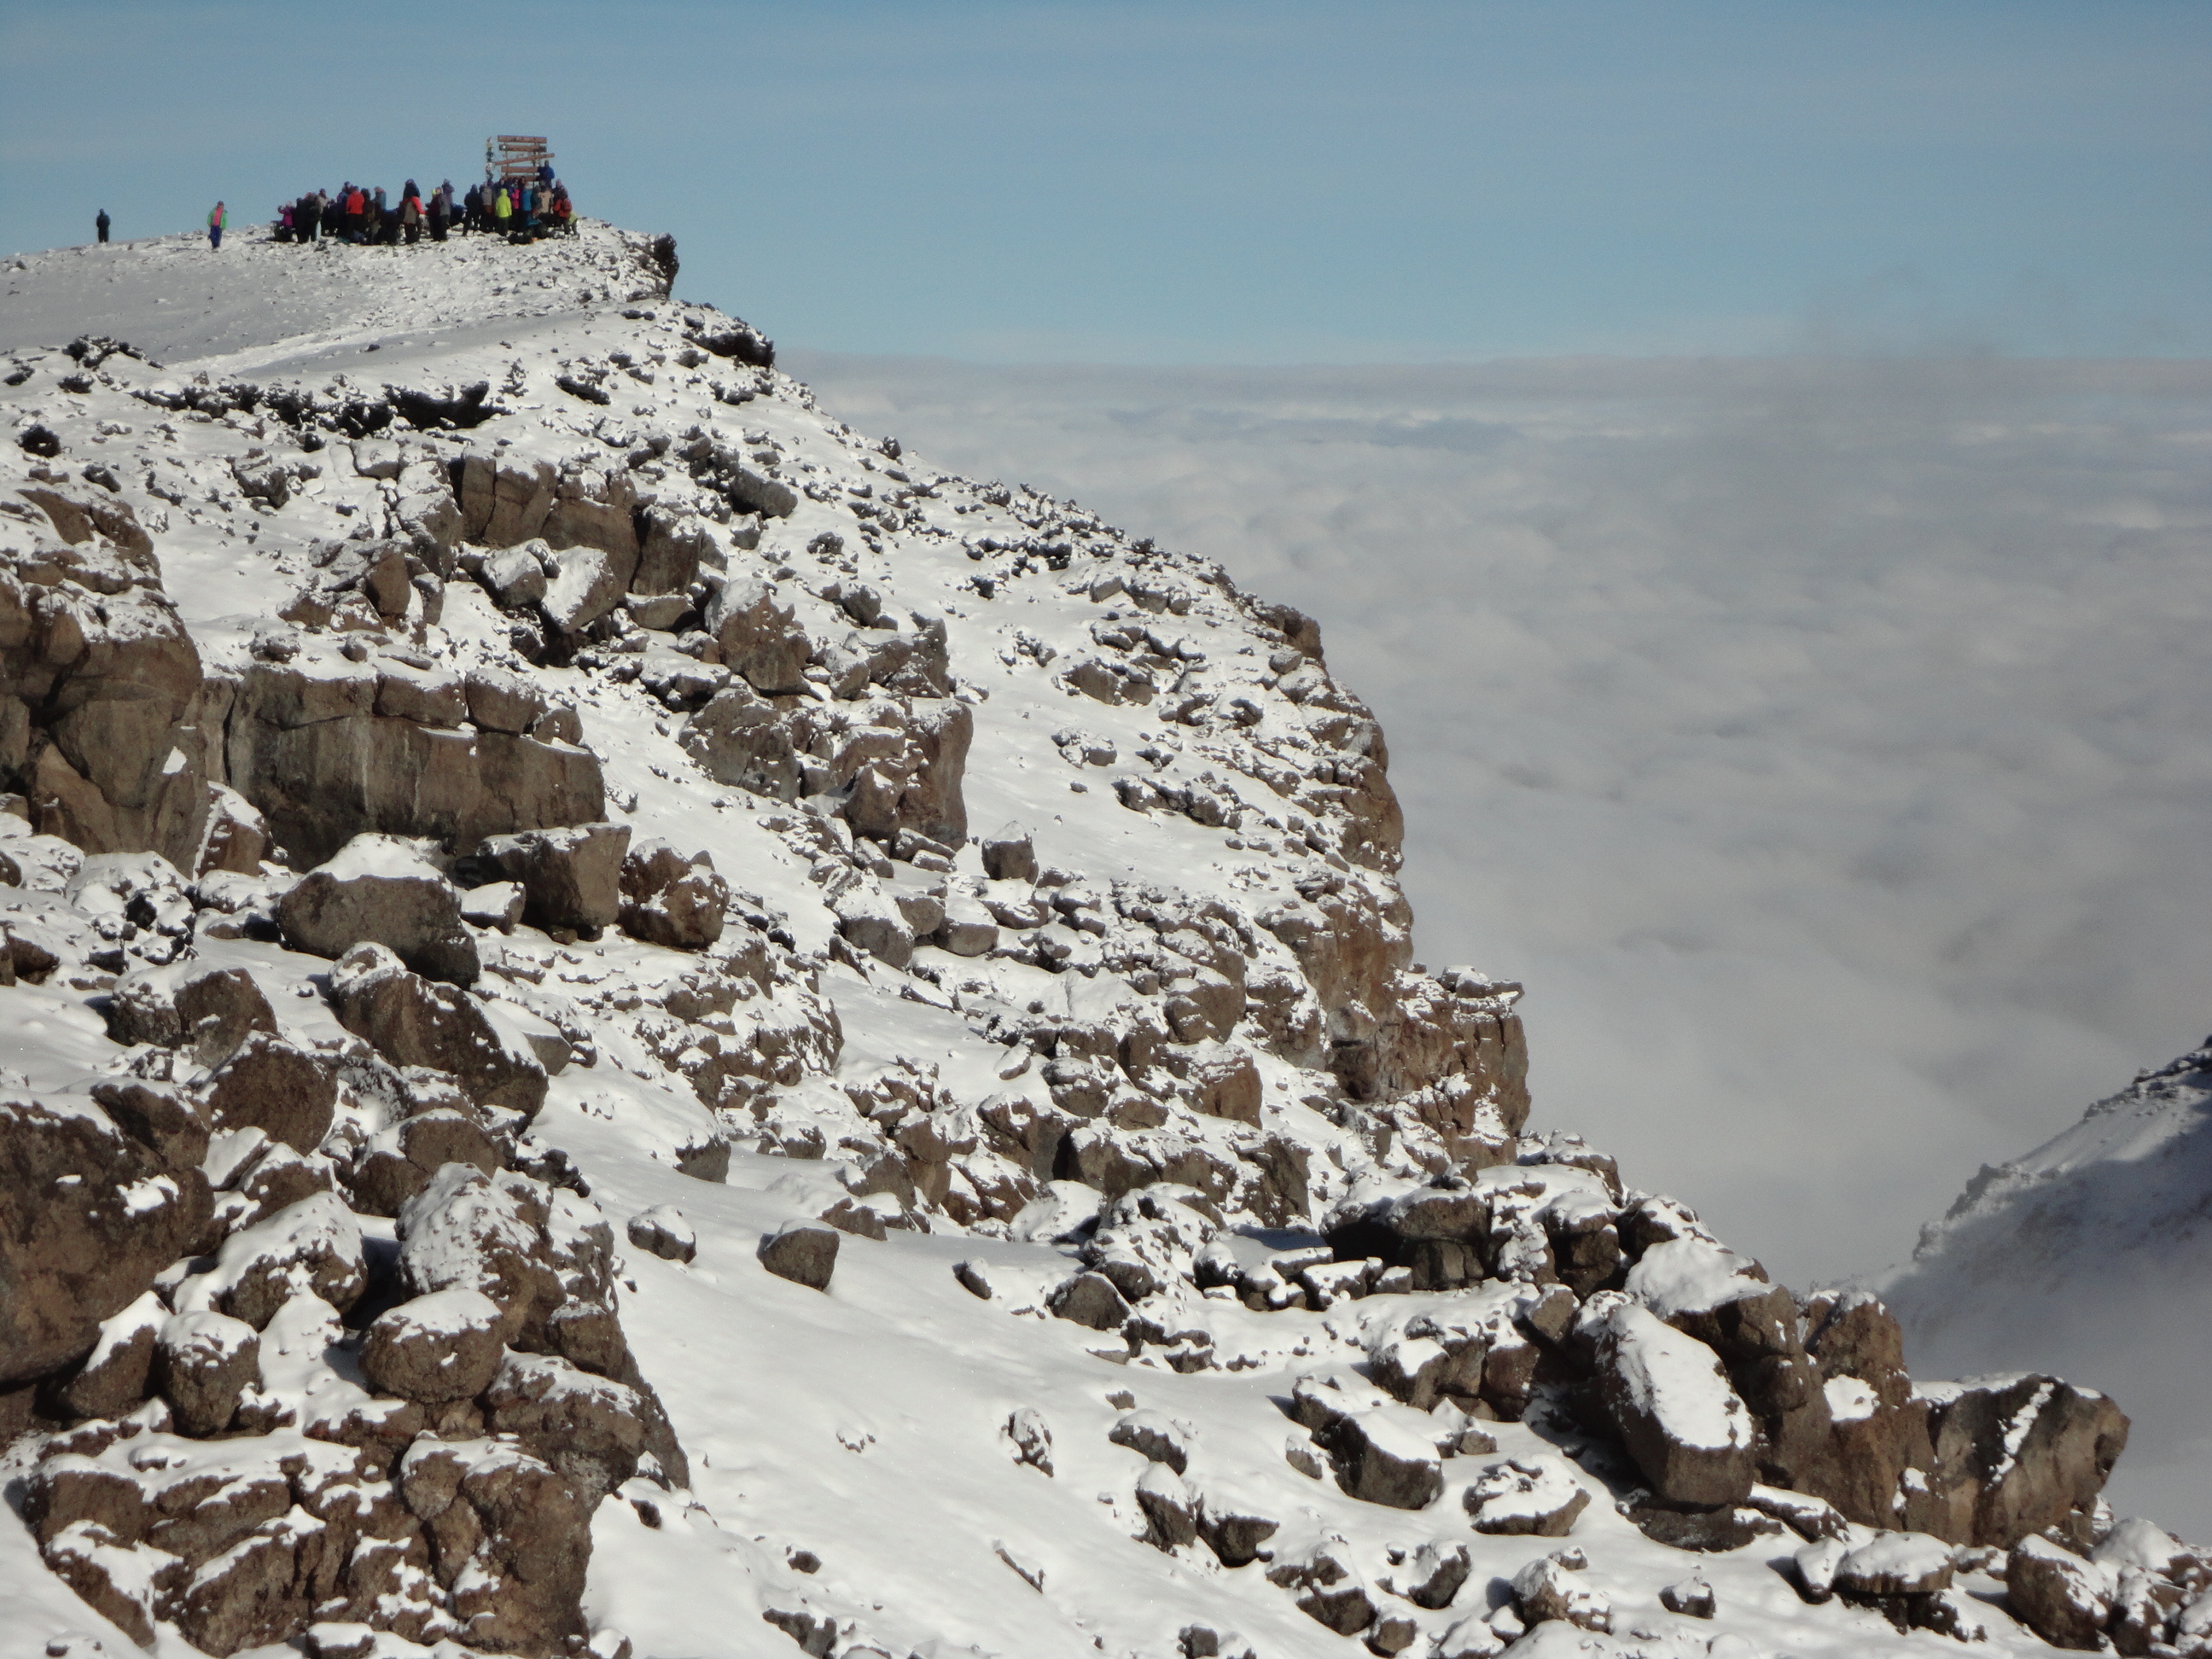 The summit of Kilimanjaro from a distance